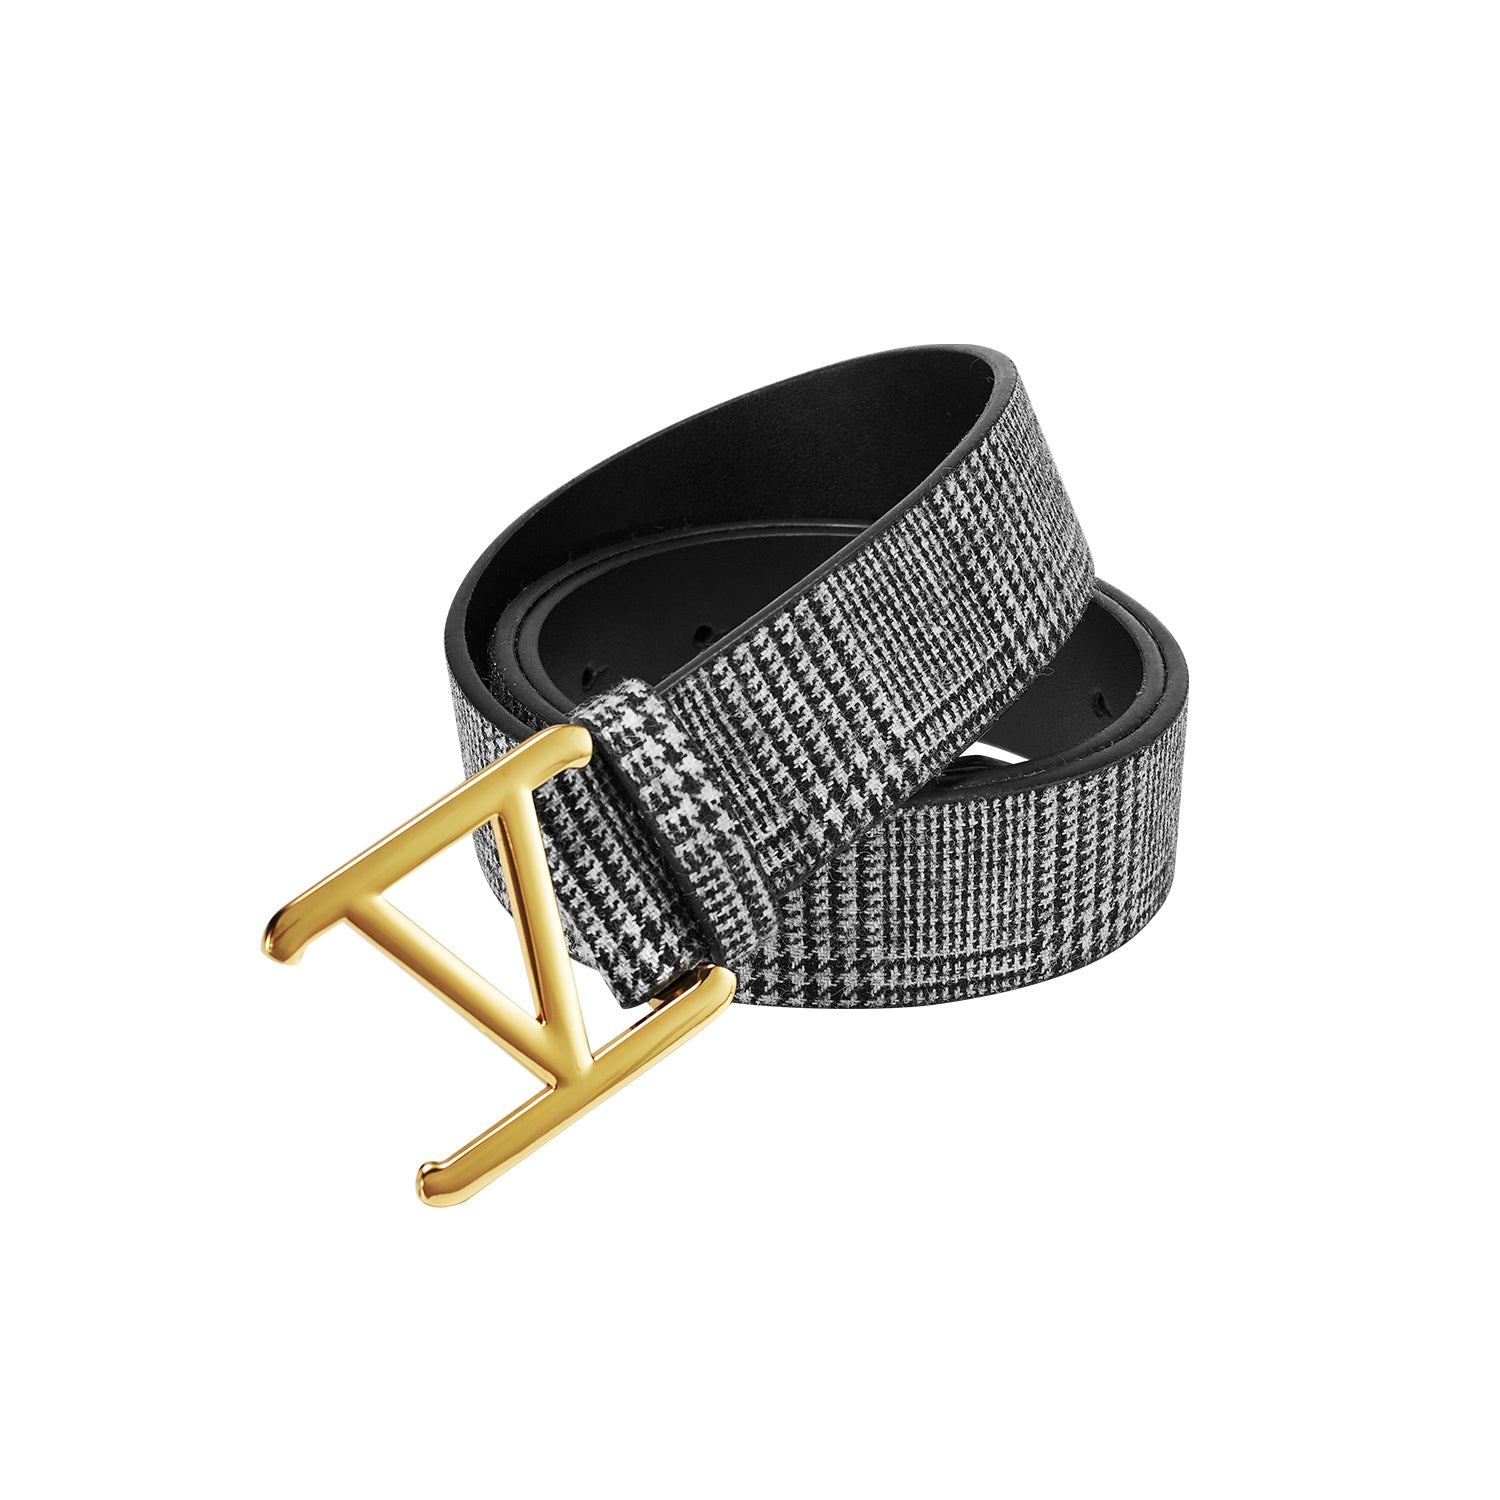 Belt Victor patterned in Black and White